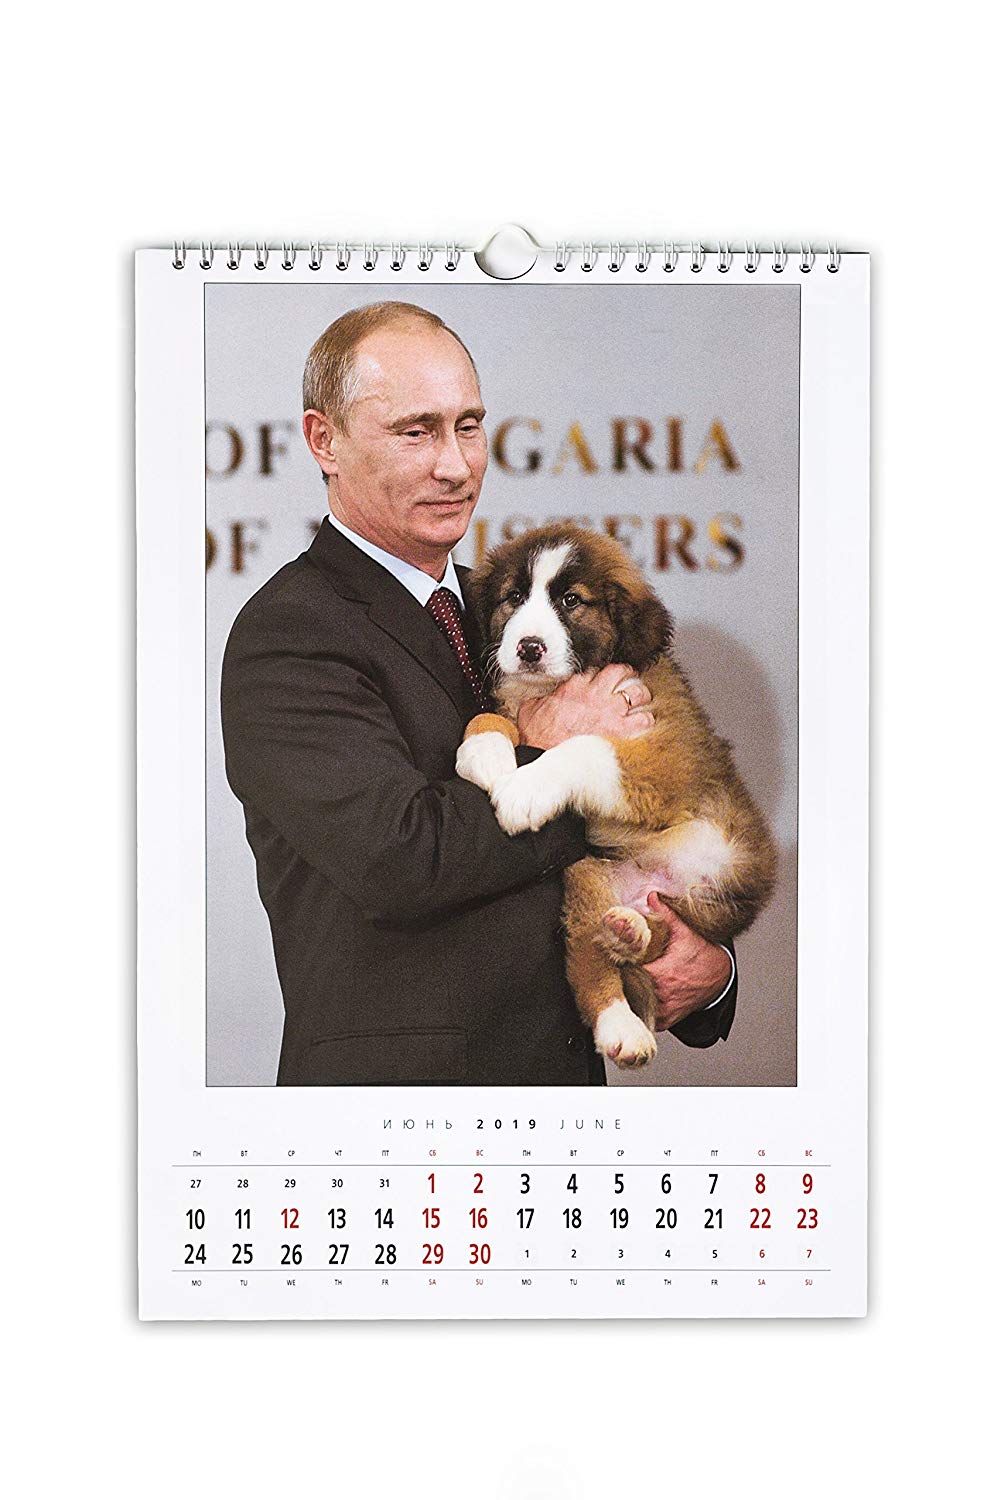 Putin's 2019 Calendar Is Here And It's As Bizarre As You'd Hope